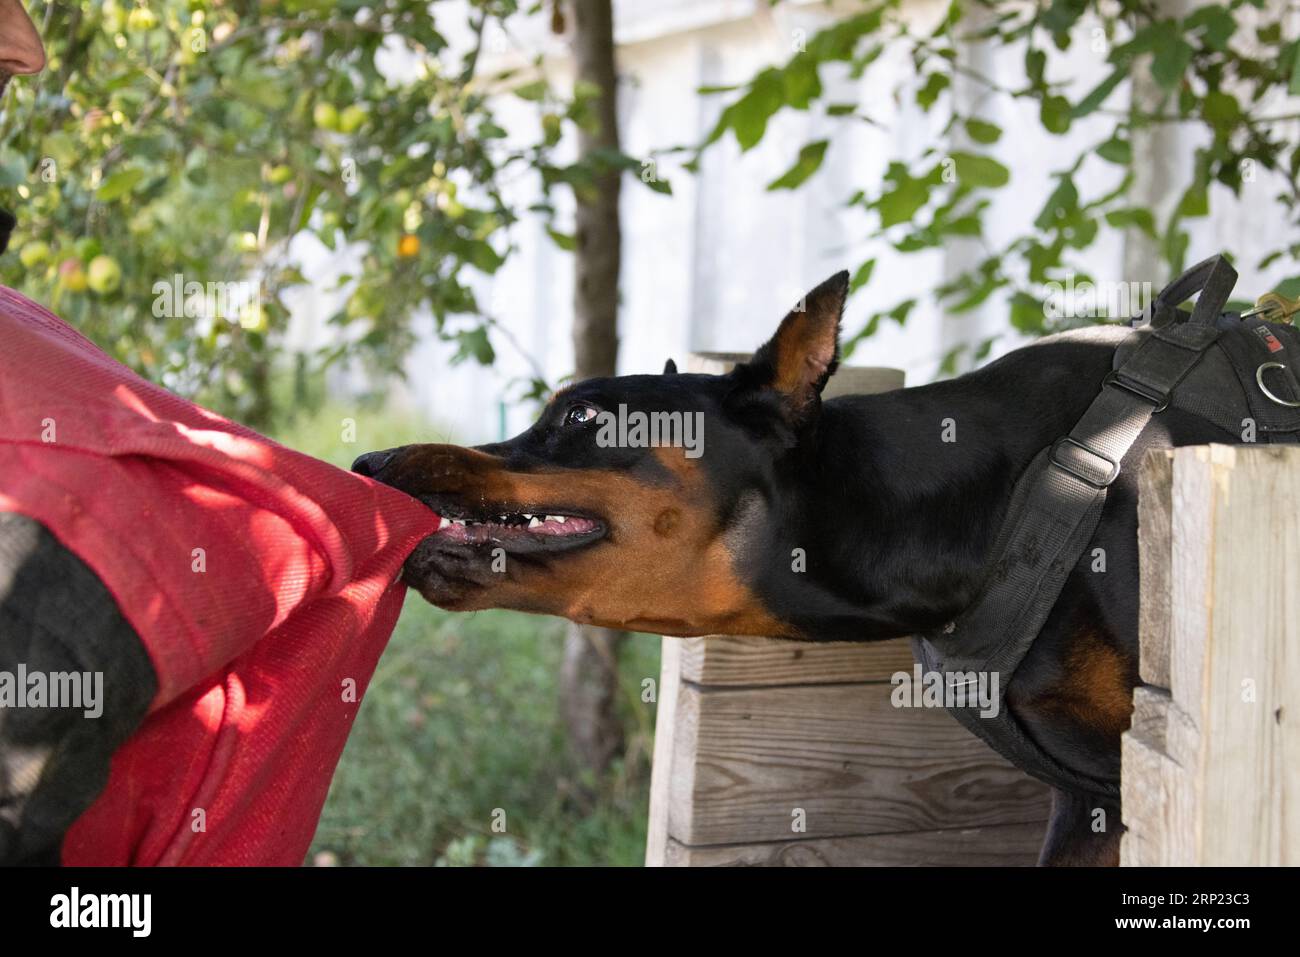 Angry Aggressive dog Doberman Pinscher grabs criminal's clothes. Service training. Bites clothes. Evil teeth Doberman Pinscher grin. Anger attack Evil Stock Photo